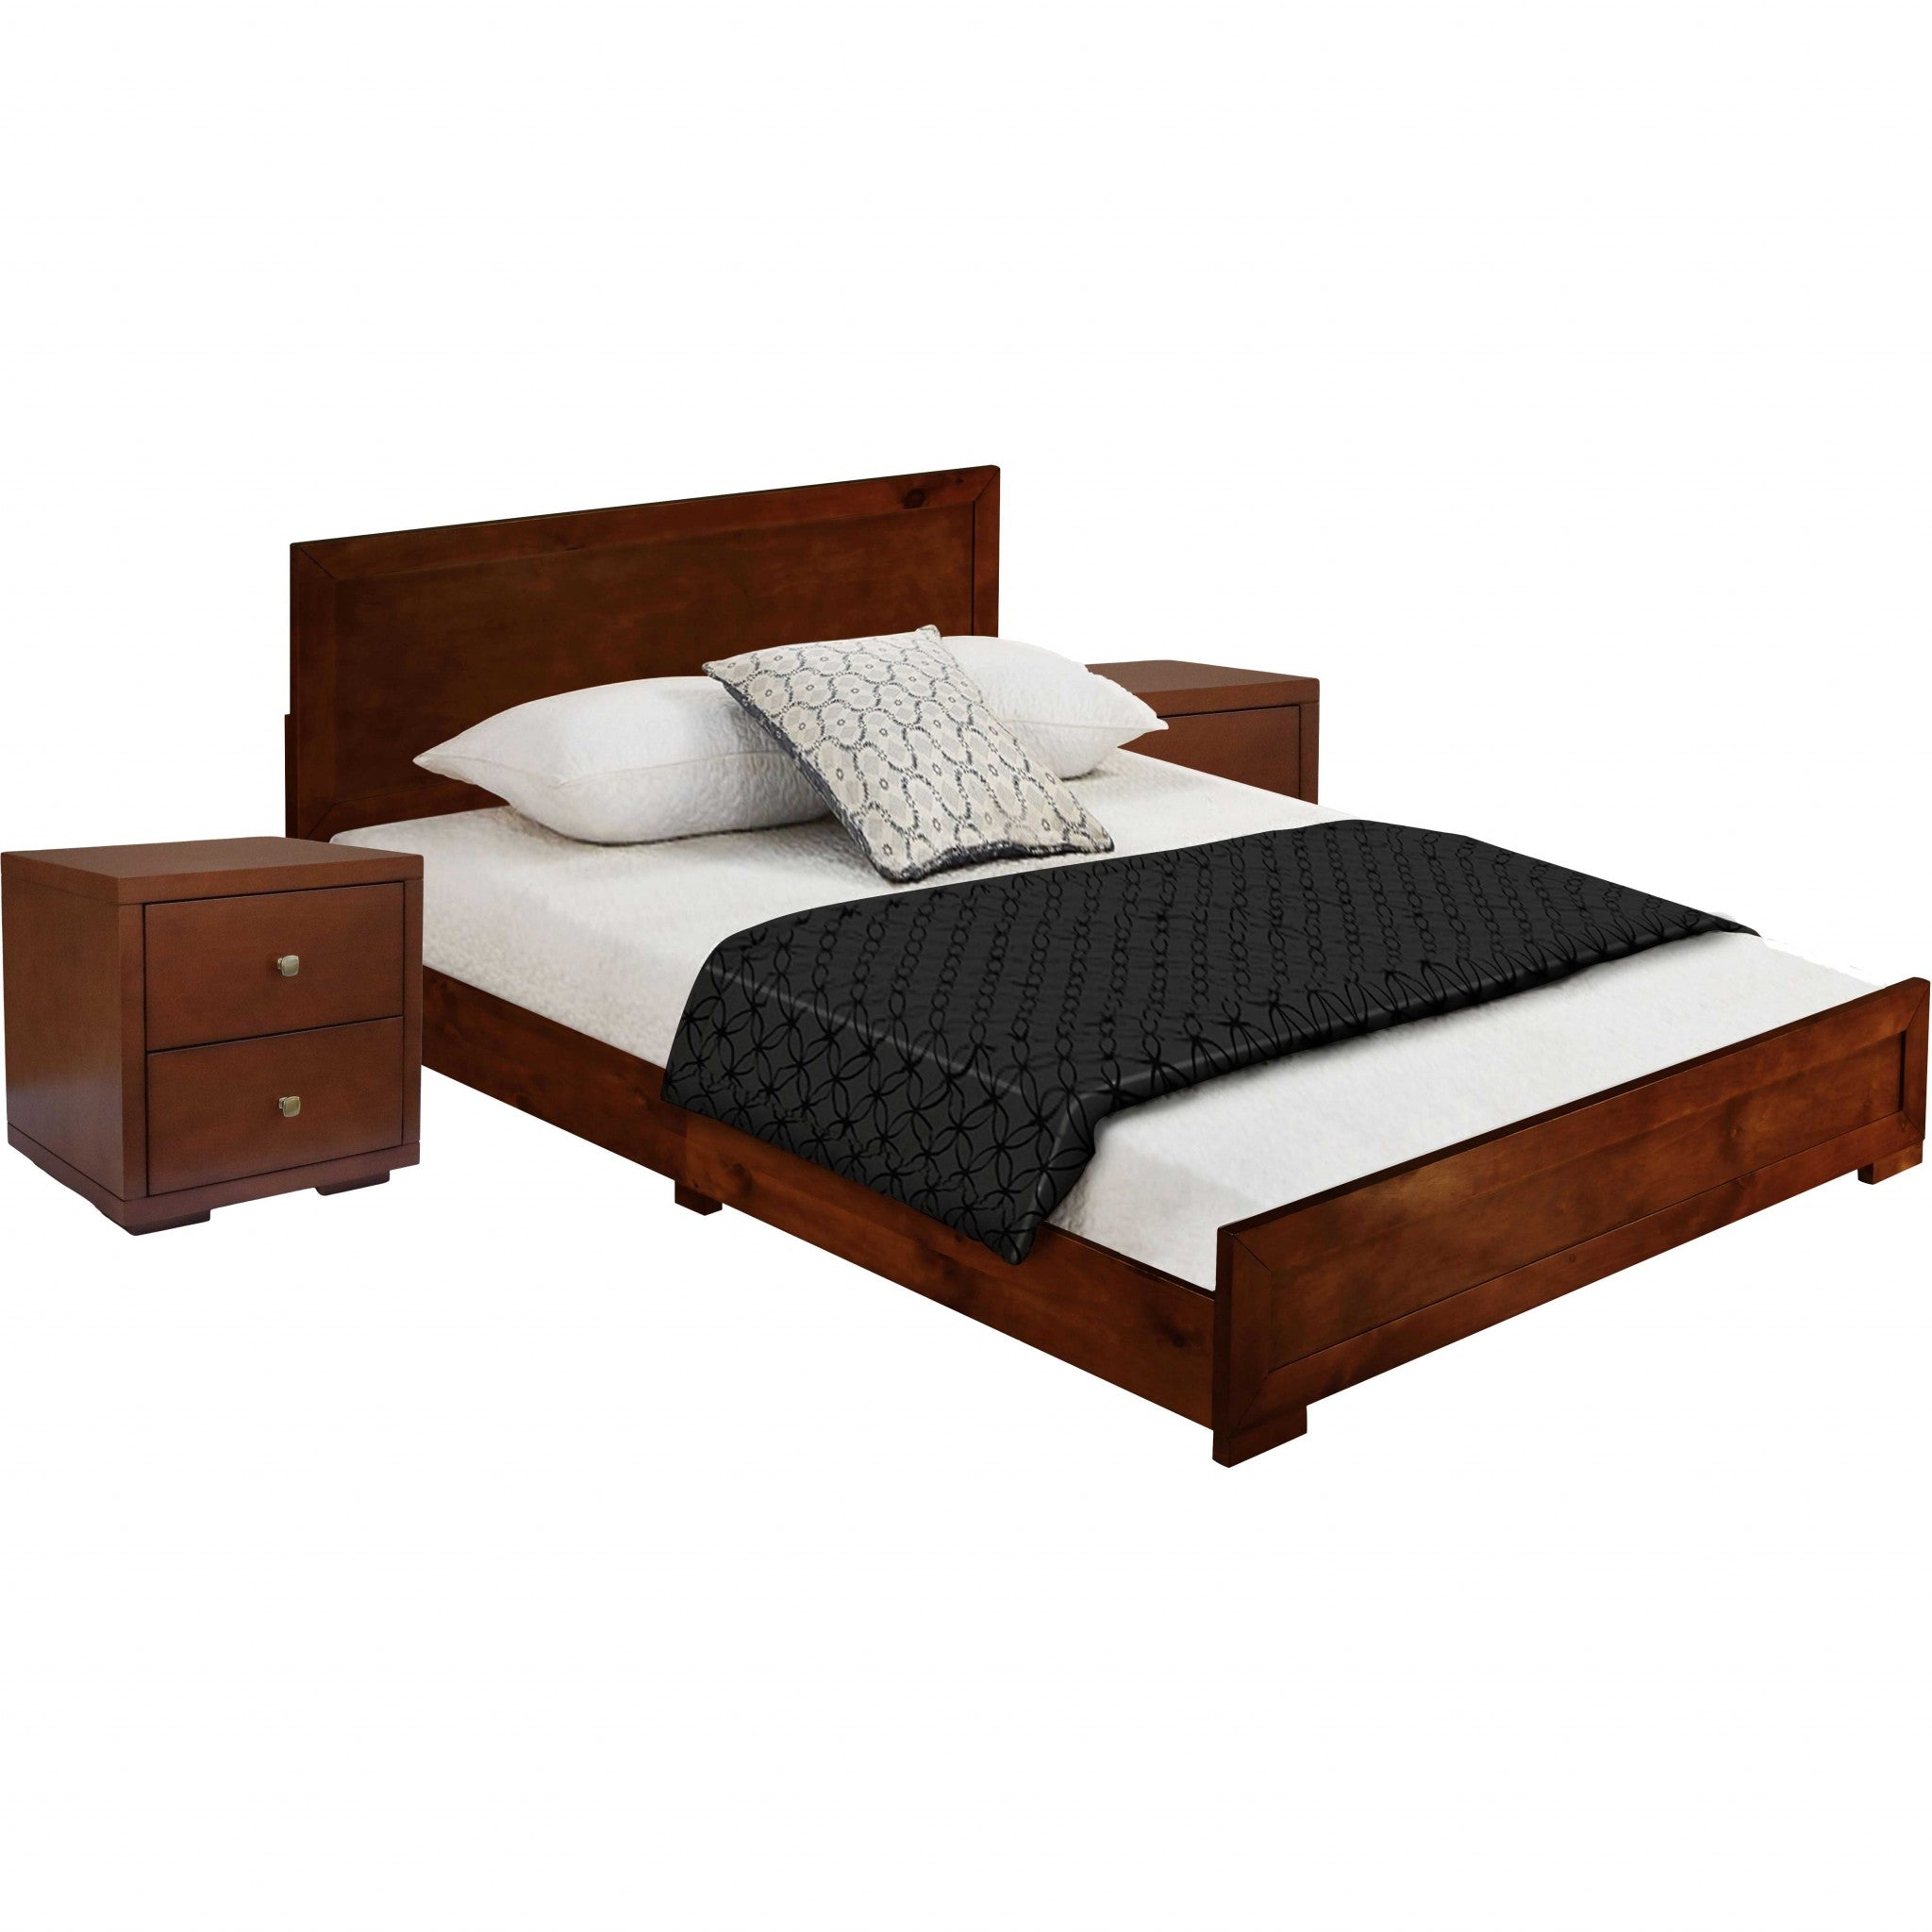 Moma Walnut Wood Platform King Bed With Two Nightstands